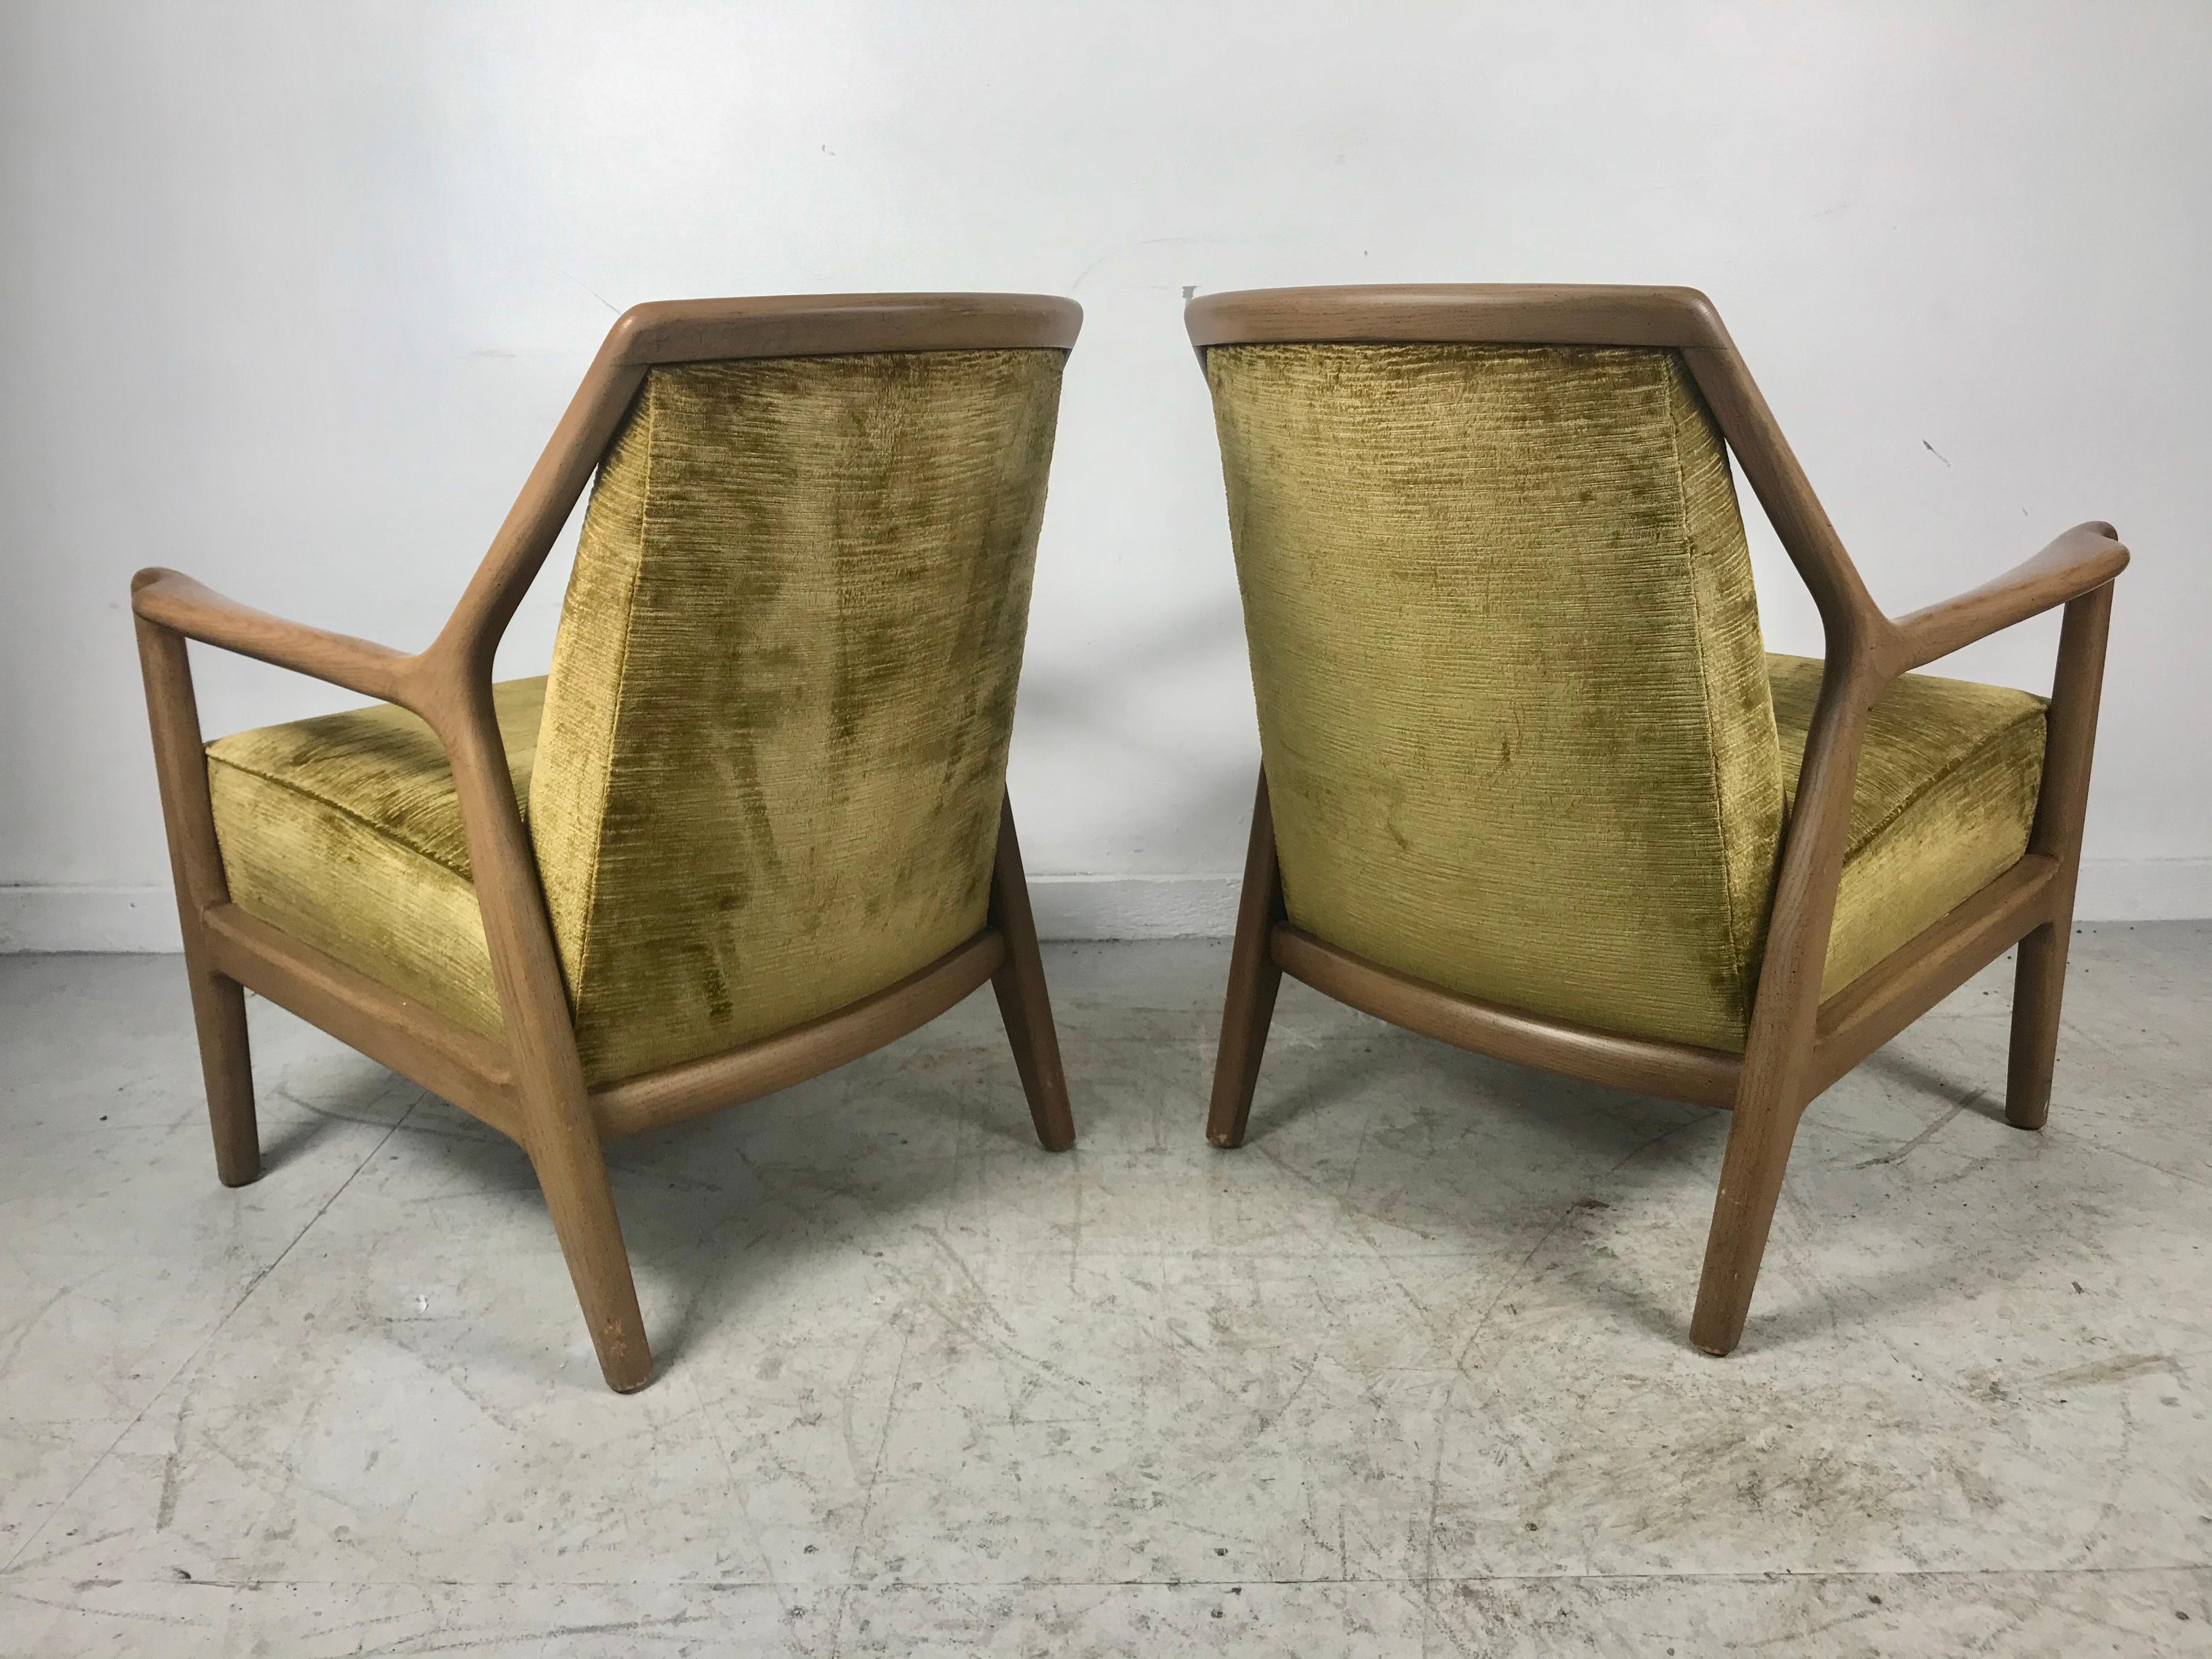 Mid-20th Century Pair of Modernist Ash Group Chairs by Jack Van der Molen for Jamestown Lounge